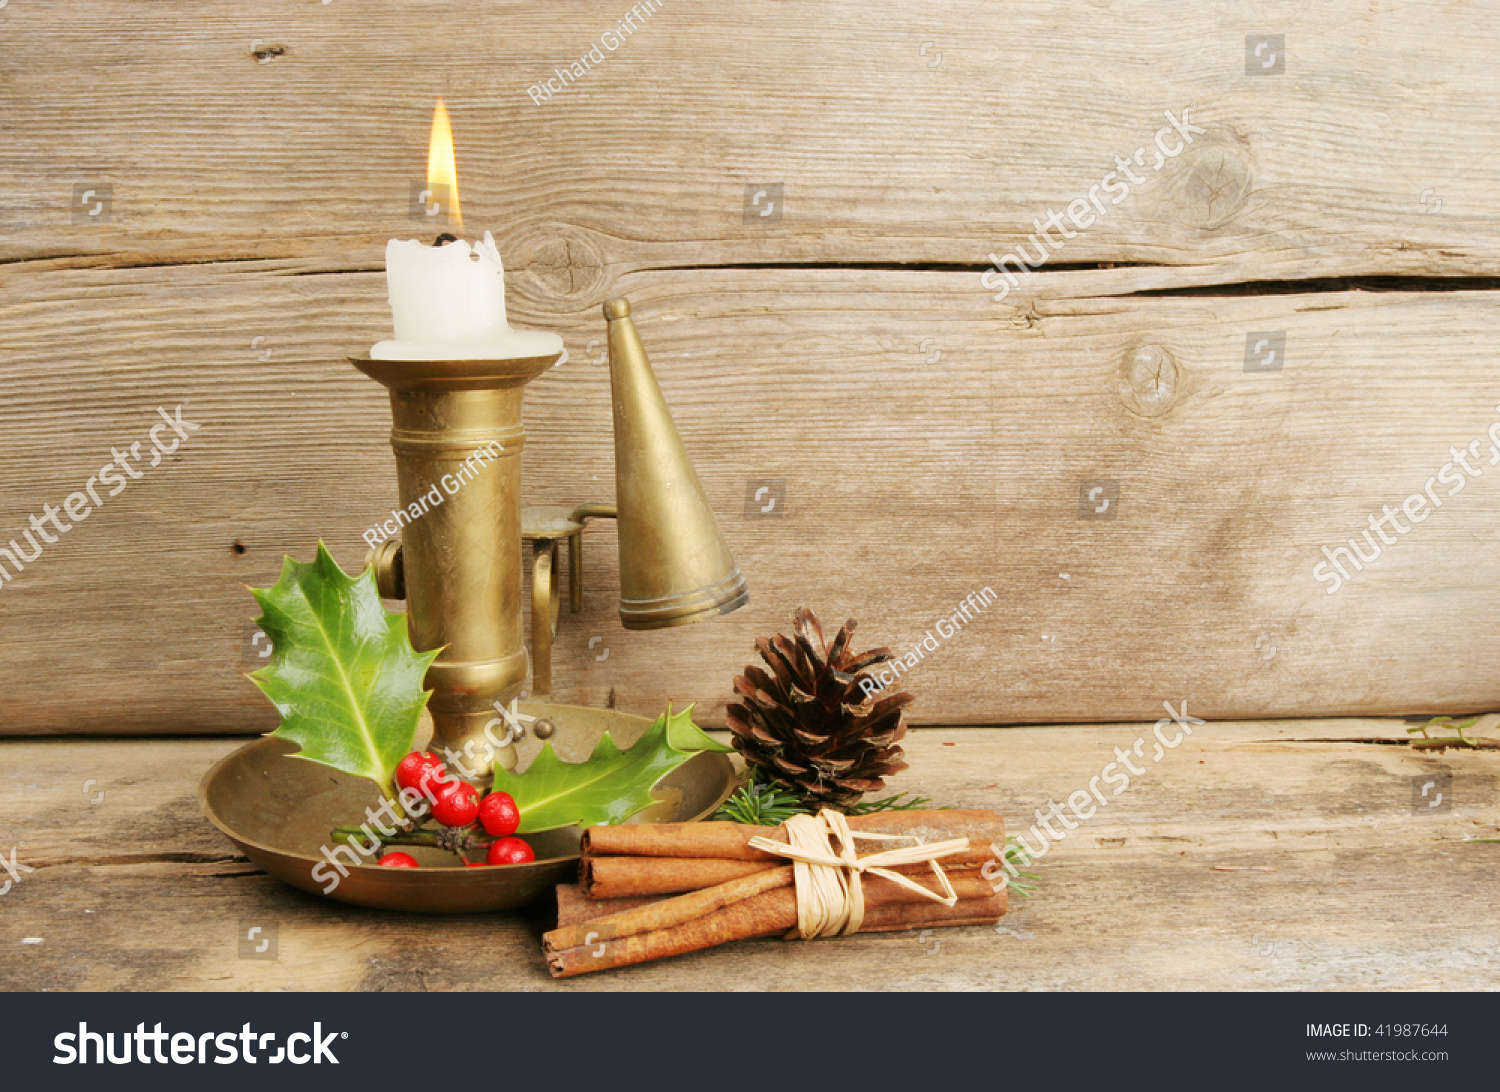 Christmas Candle Arrangement On A Background Of Old Rustic Wood Stock ...